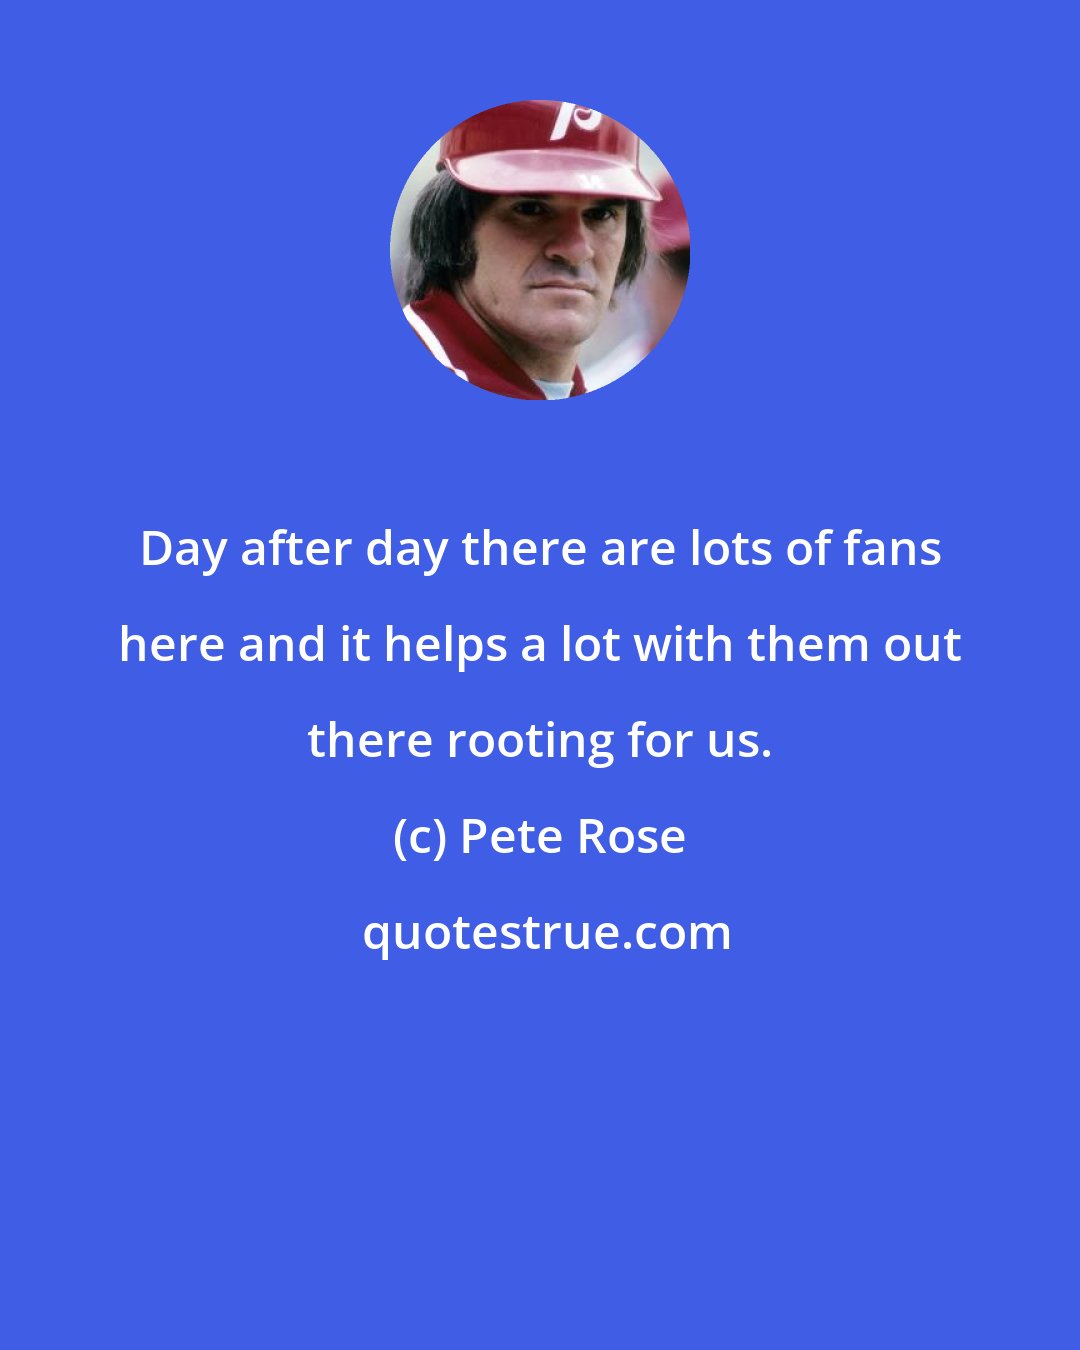 Pete Rose: Day after day there are lots of fans here and it helps a lot with them out there rooting for us.